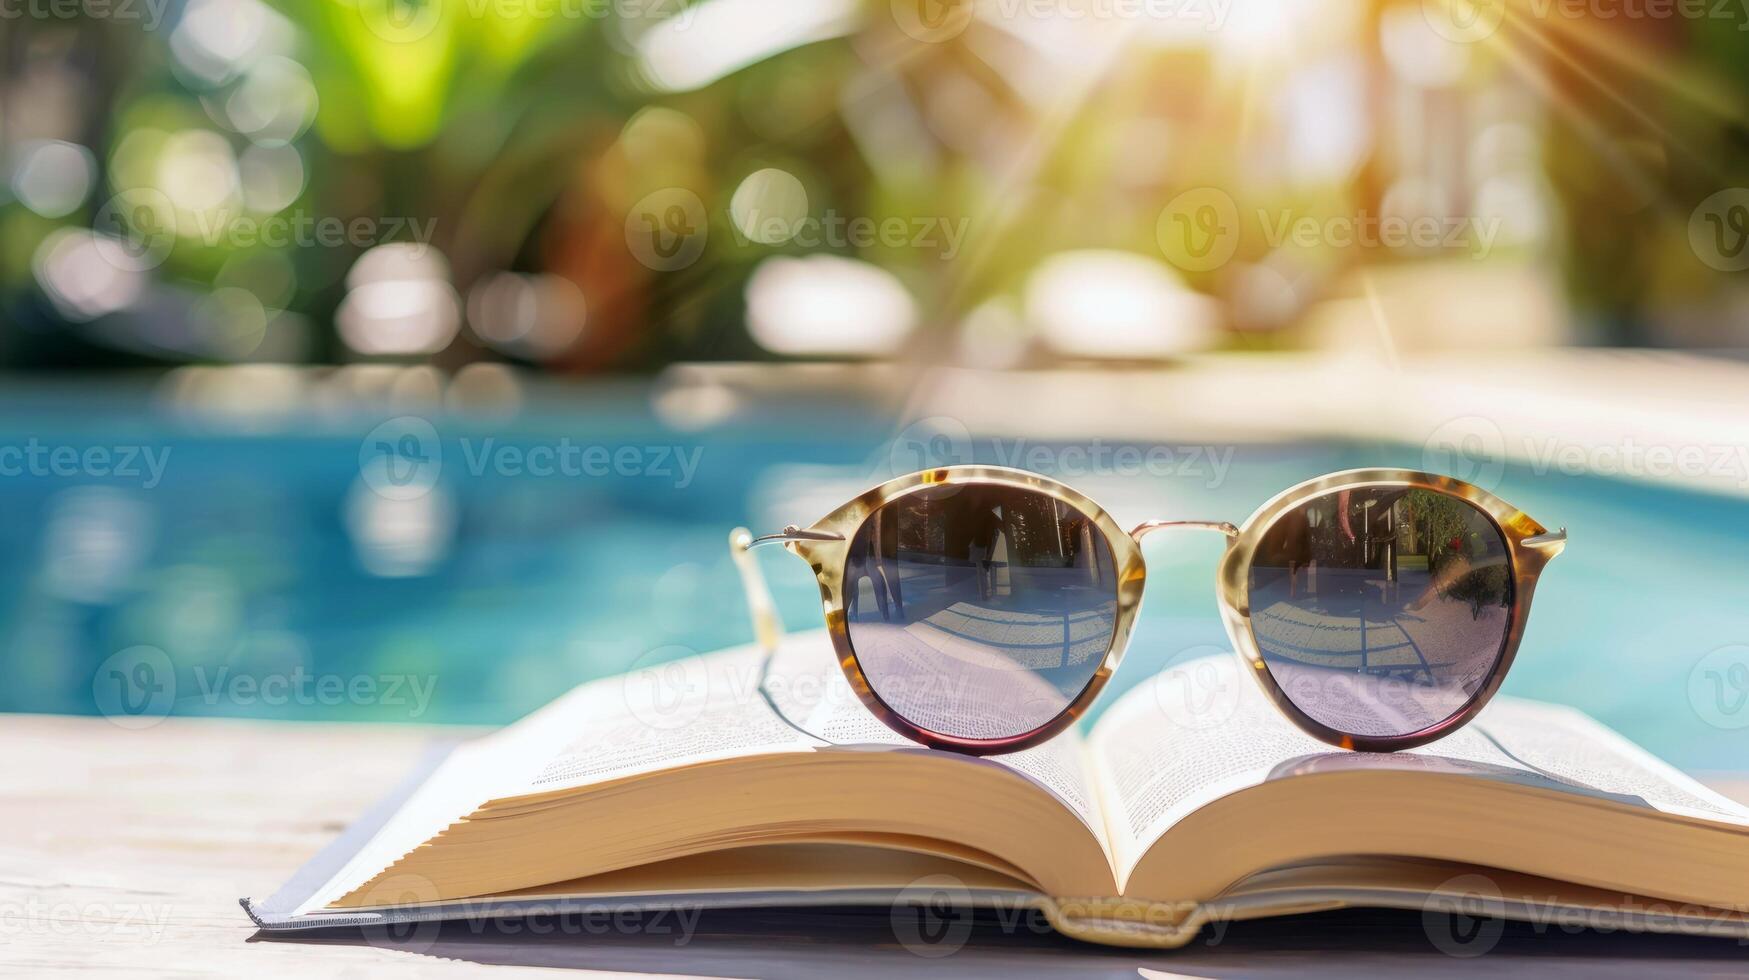 Pair of sunglasses resting on book by the poolside, epitomizing lazy summer days photo